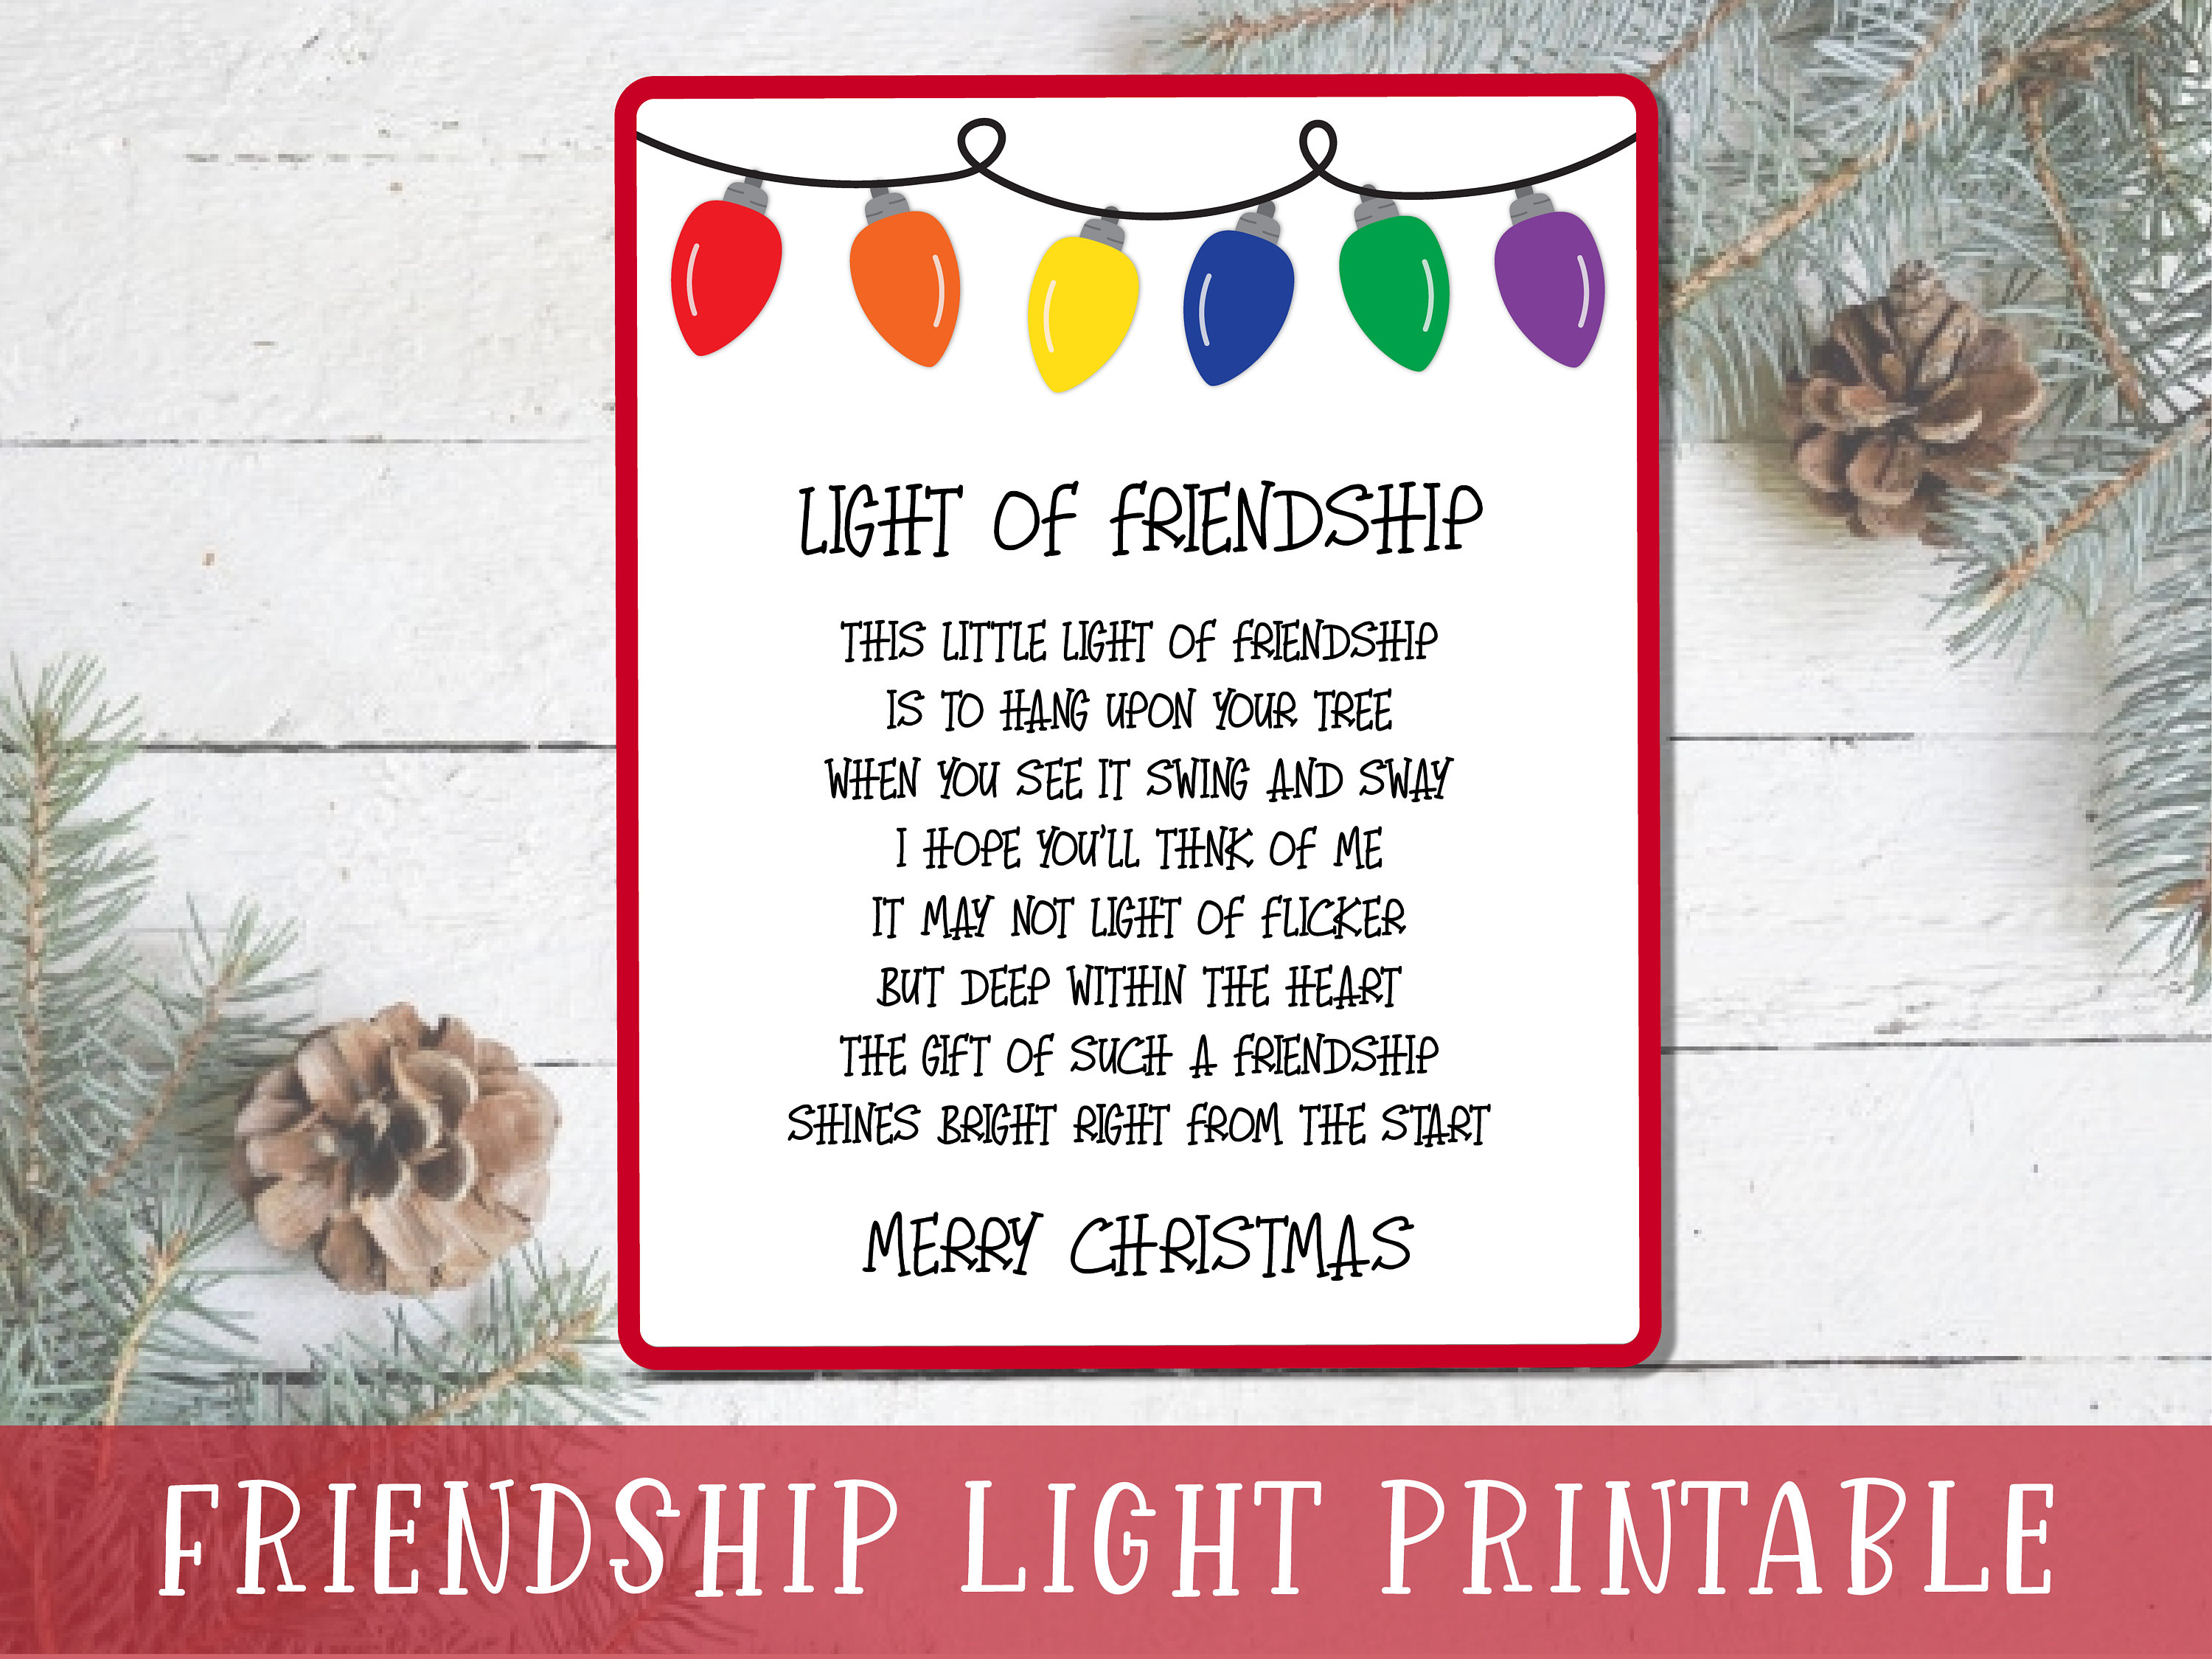 light-of-friendship-printable-card-poem-for-friendship-etsy-canada